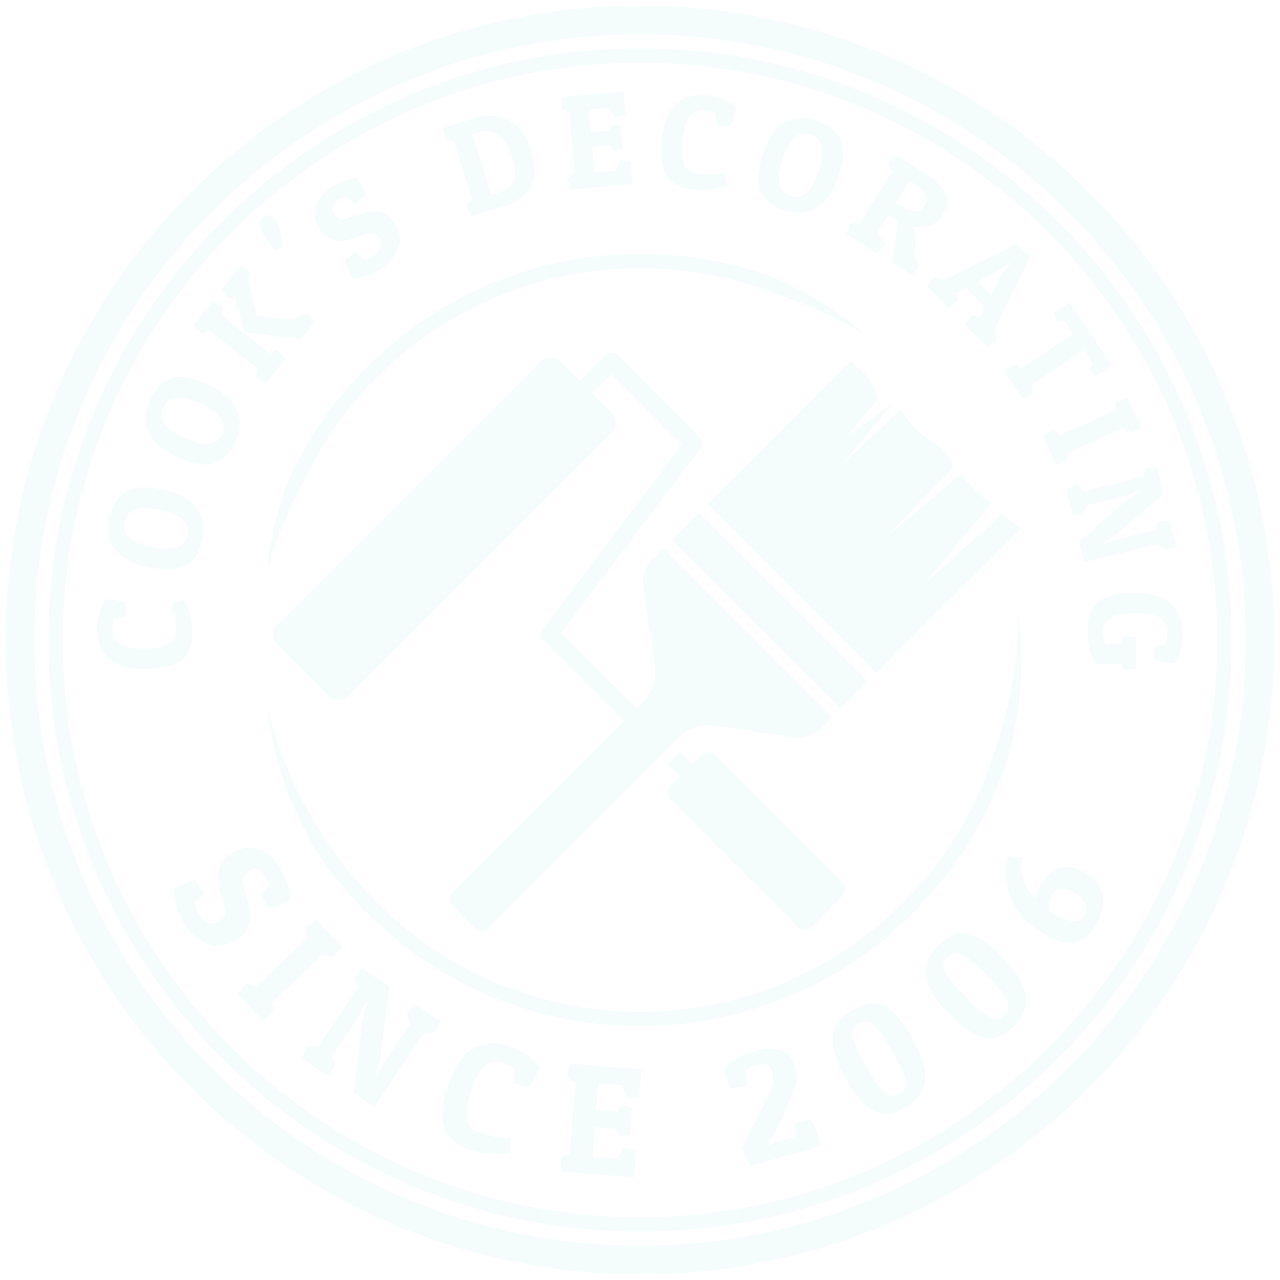 COOK'S DECORATING's web page